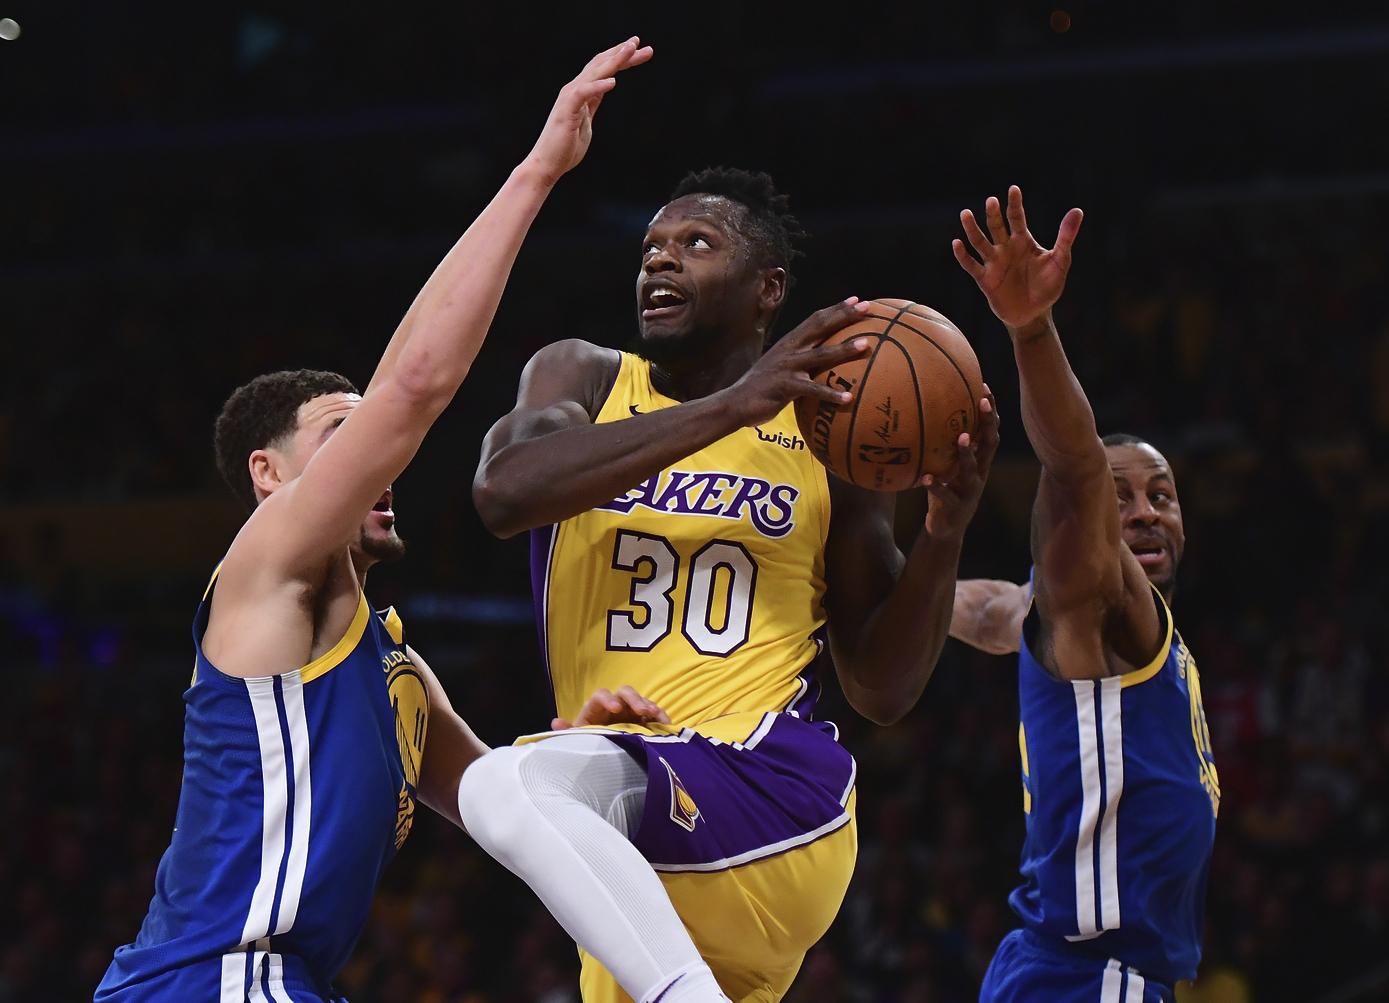 Warriors-Lakers brings its own brand of intrigue